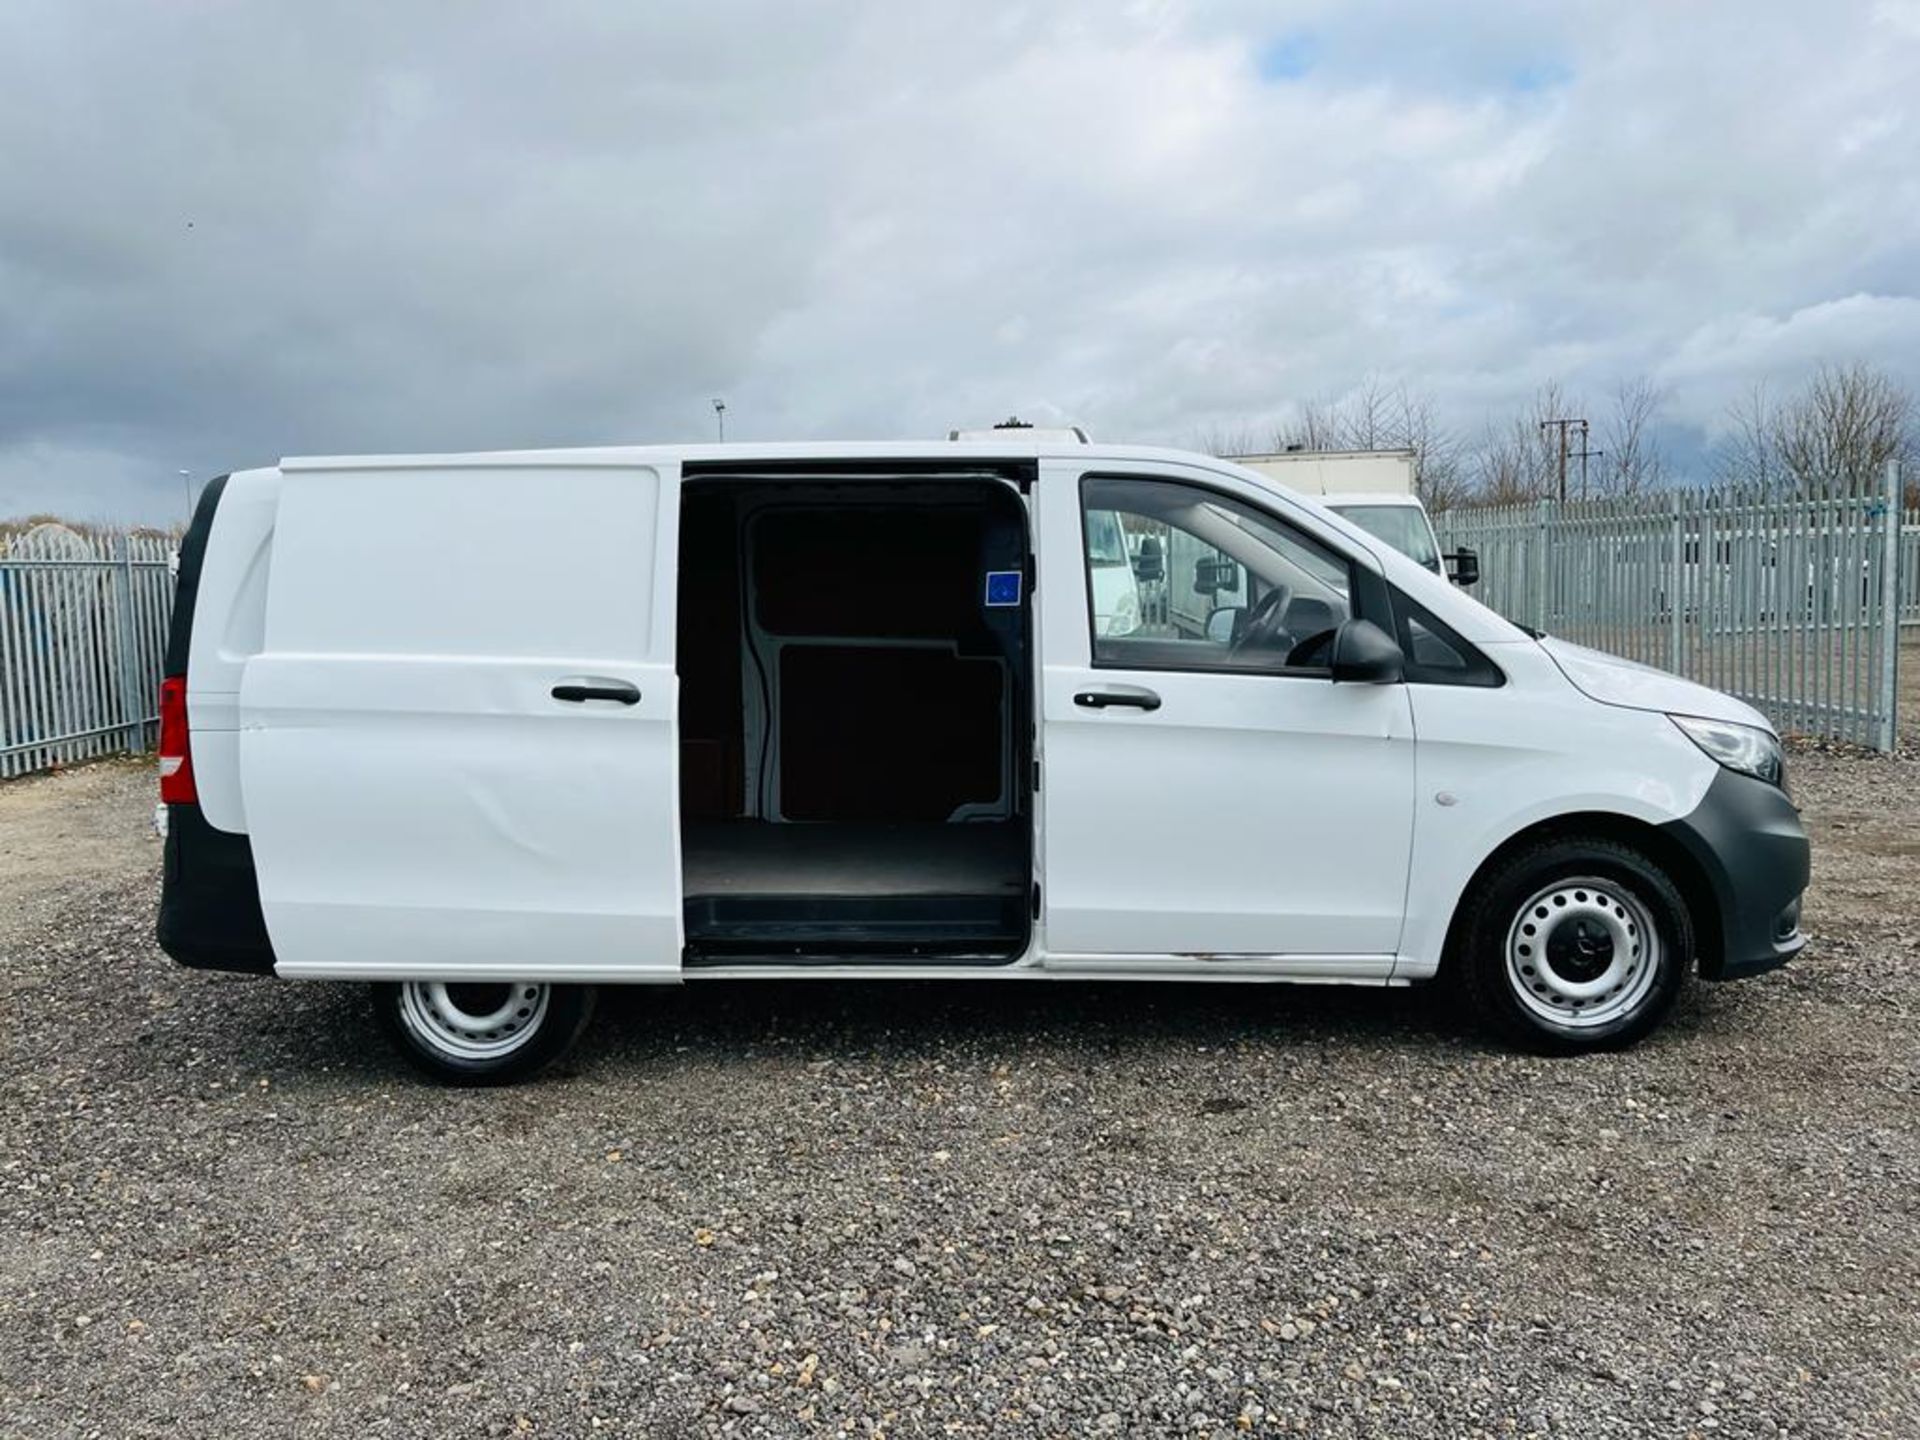 Mercedes Benz Vito 1.6 111 CDI FWD 2019 '19 Reg' - ULEZ Compliant - Only 85,733 Miles - Image 11 of 24